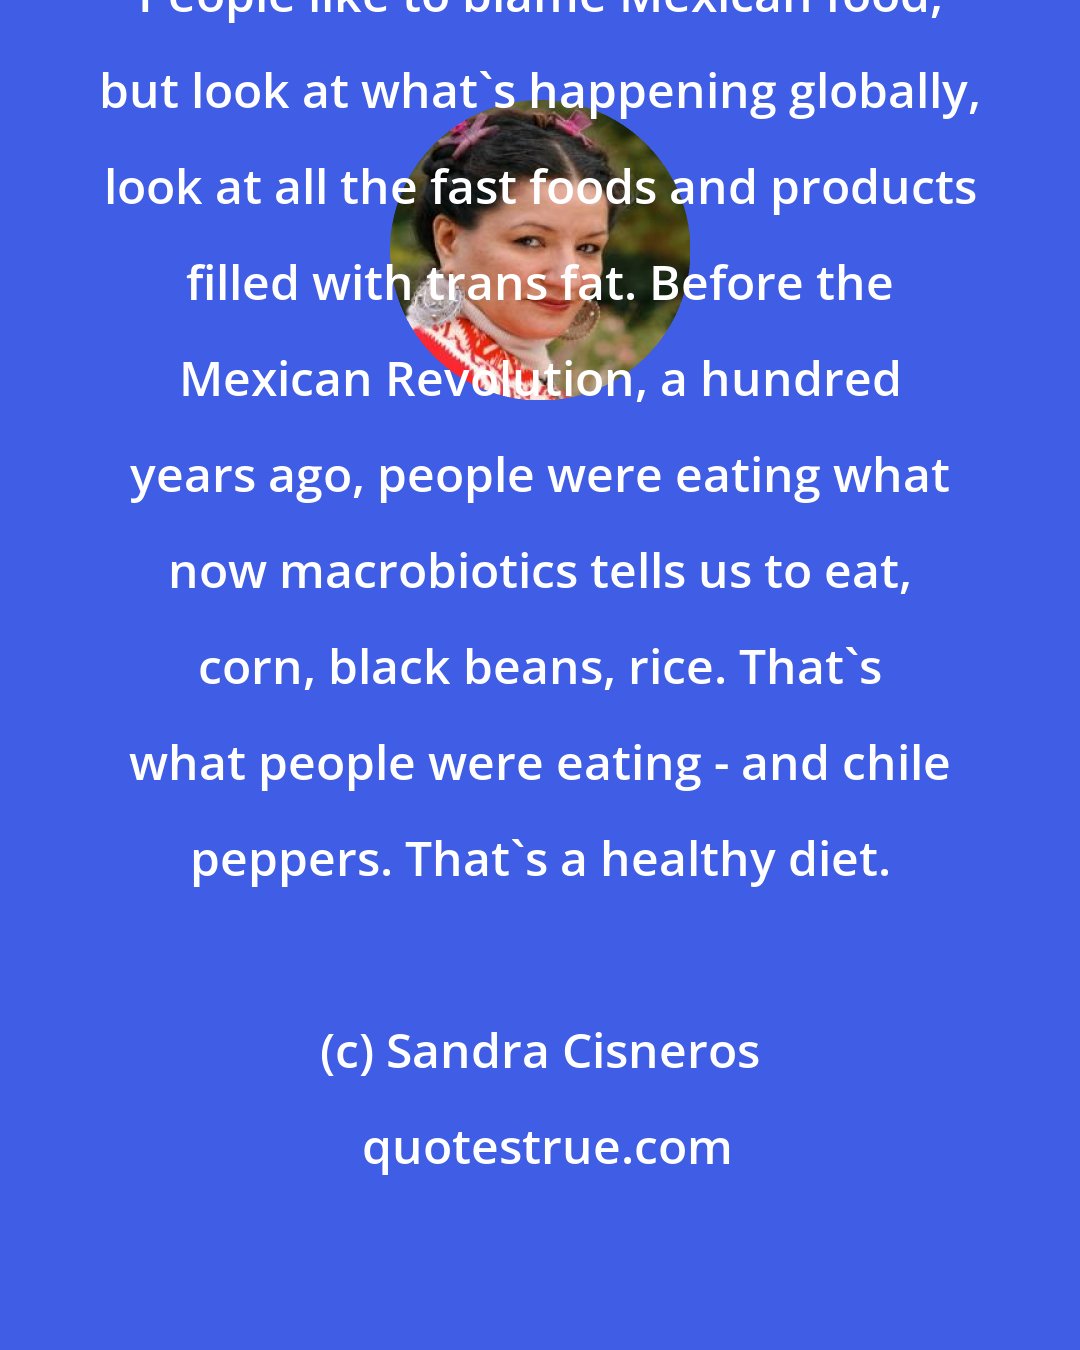 Sandra Cisneros: People like to blame Mexican food, but look at what's happening globally, look at all the fast foods and products filled with trans fat. Before the Mexican Revolution, a hundred years ago, people were eating what now macrobiotics tells us to eat, corn, black beans, rice. That's what people were eating - and chile peppers. That's a healthy diet.